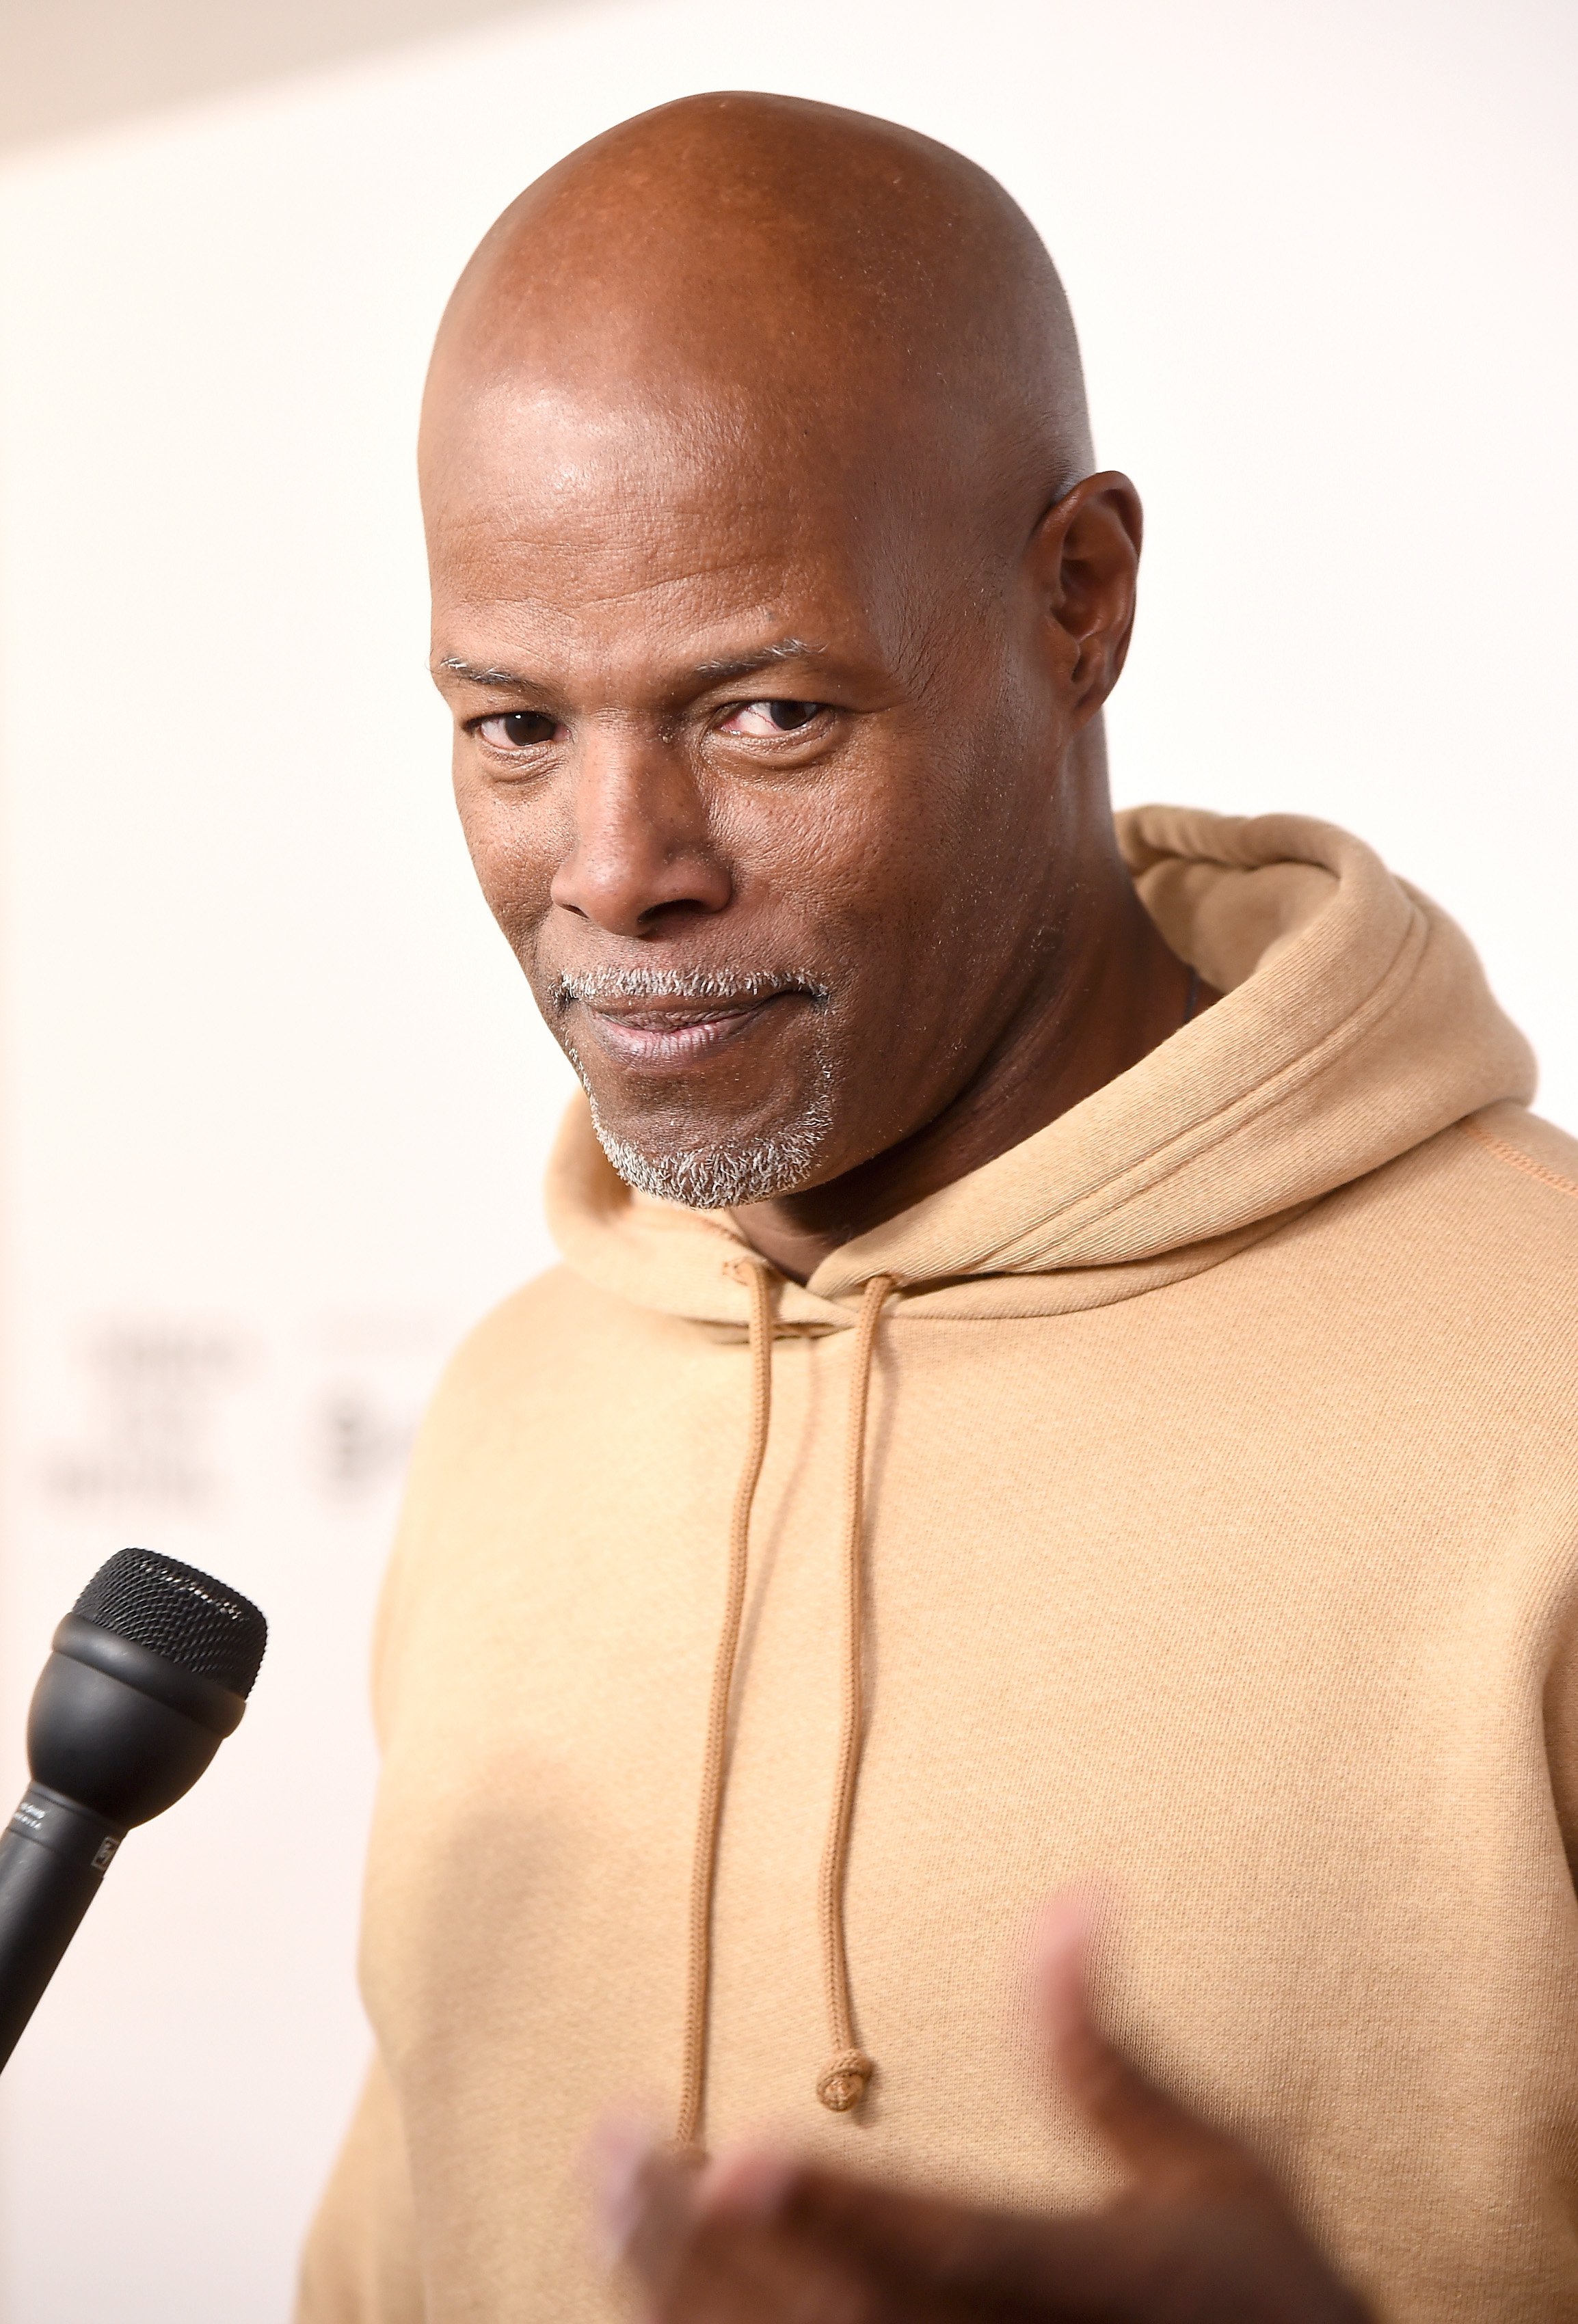 Keenen Ivory Wayans at the Tribeca TV "In Living Color" 25th anniversary reunion during the 2019 Tribeca Film Festival on April 27, 2019, in New York City. | Source: Getty Images